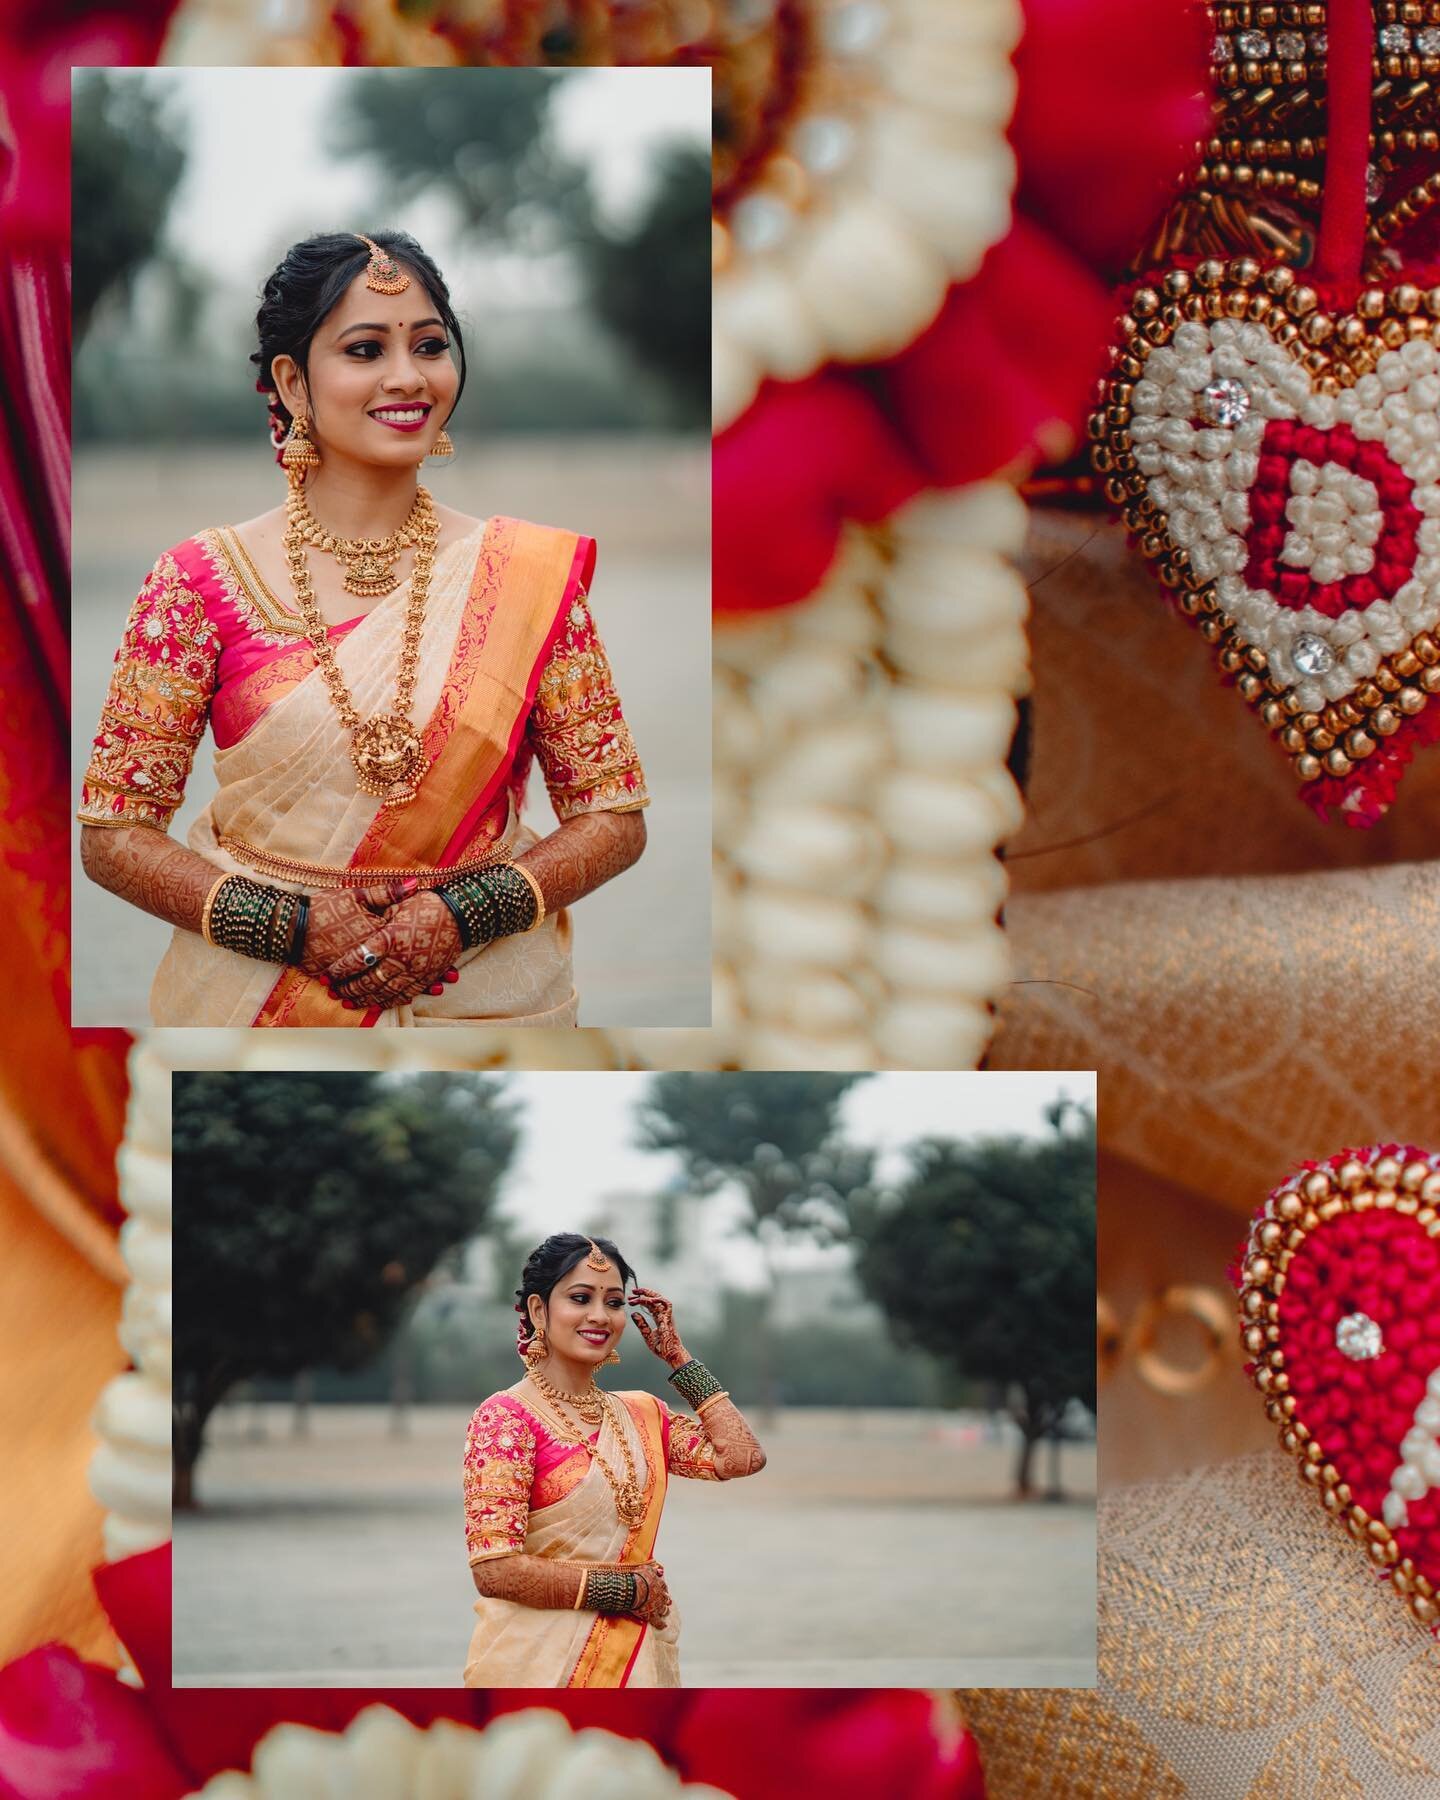 Do you see D &amp; A?
How brides make their special day even more special with all such creative thinking!
.
Capturing emotions by @myshutterclicksphotography 
.
.
#scrlphoto #weddingscrl #weddingphoto #wedmegood #creativeweddingideas #bridalshoot #c